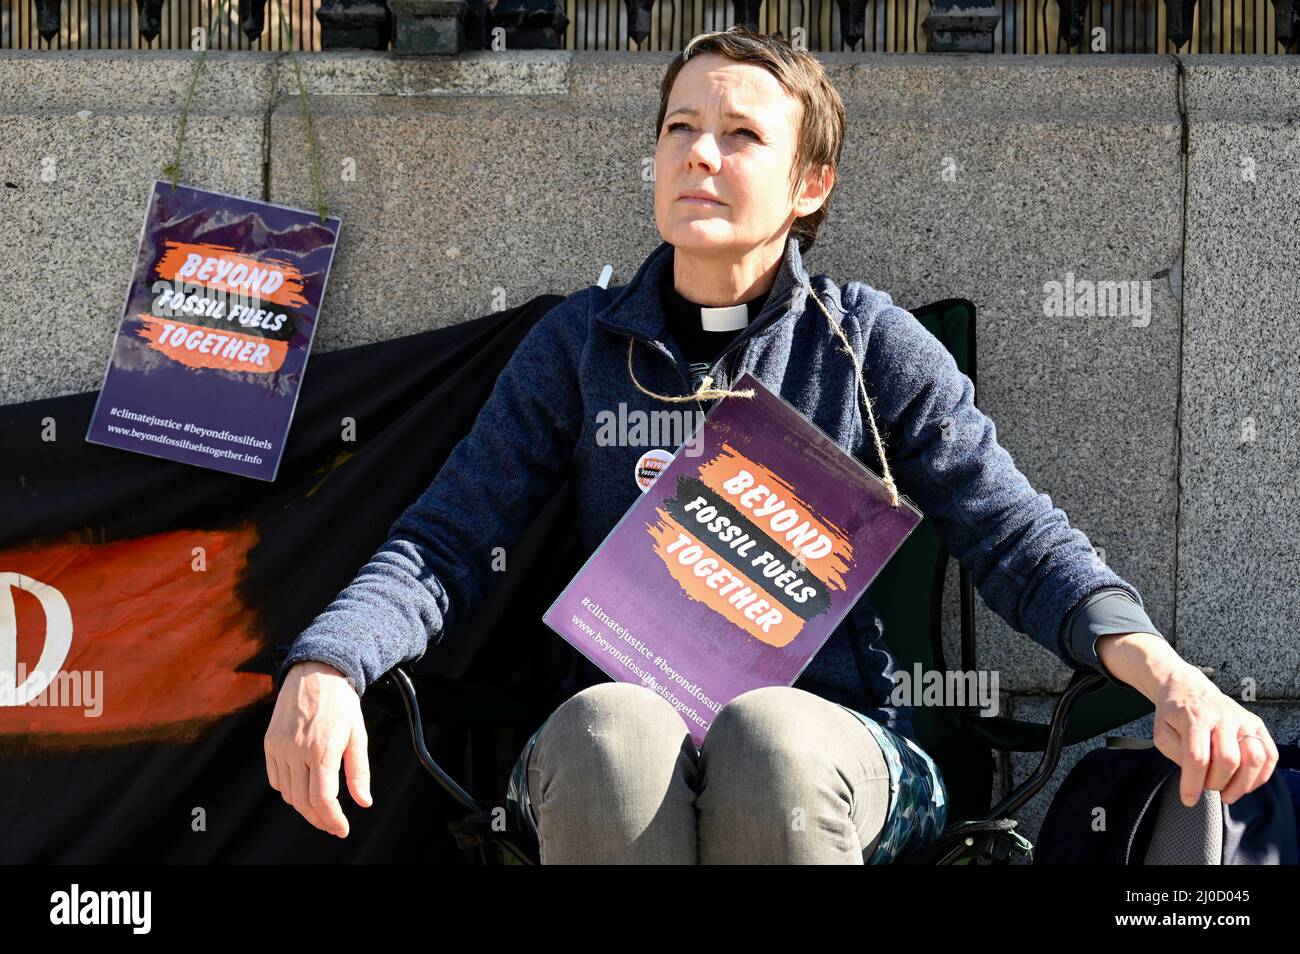 18th March 2022. London, UK. The Reverand Vanessa Aston joined Christian Climate Actions "Beyond Fossil Fuels Together" vigil and fast outside the Houses of Parliament, Parliament Square, Westminster. Credit: michael melia/Alamy Live News Stock Photo